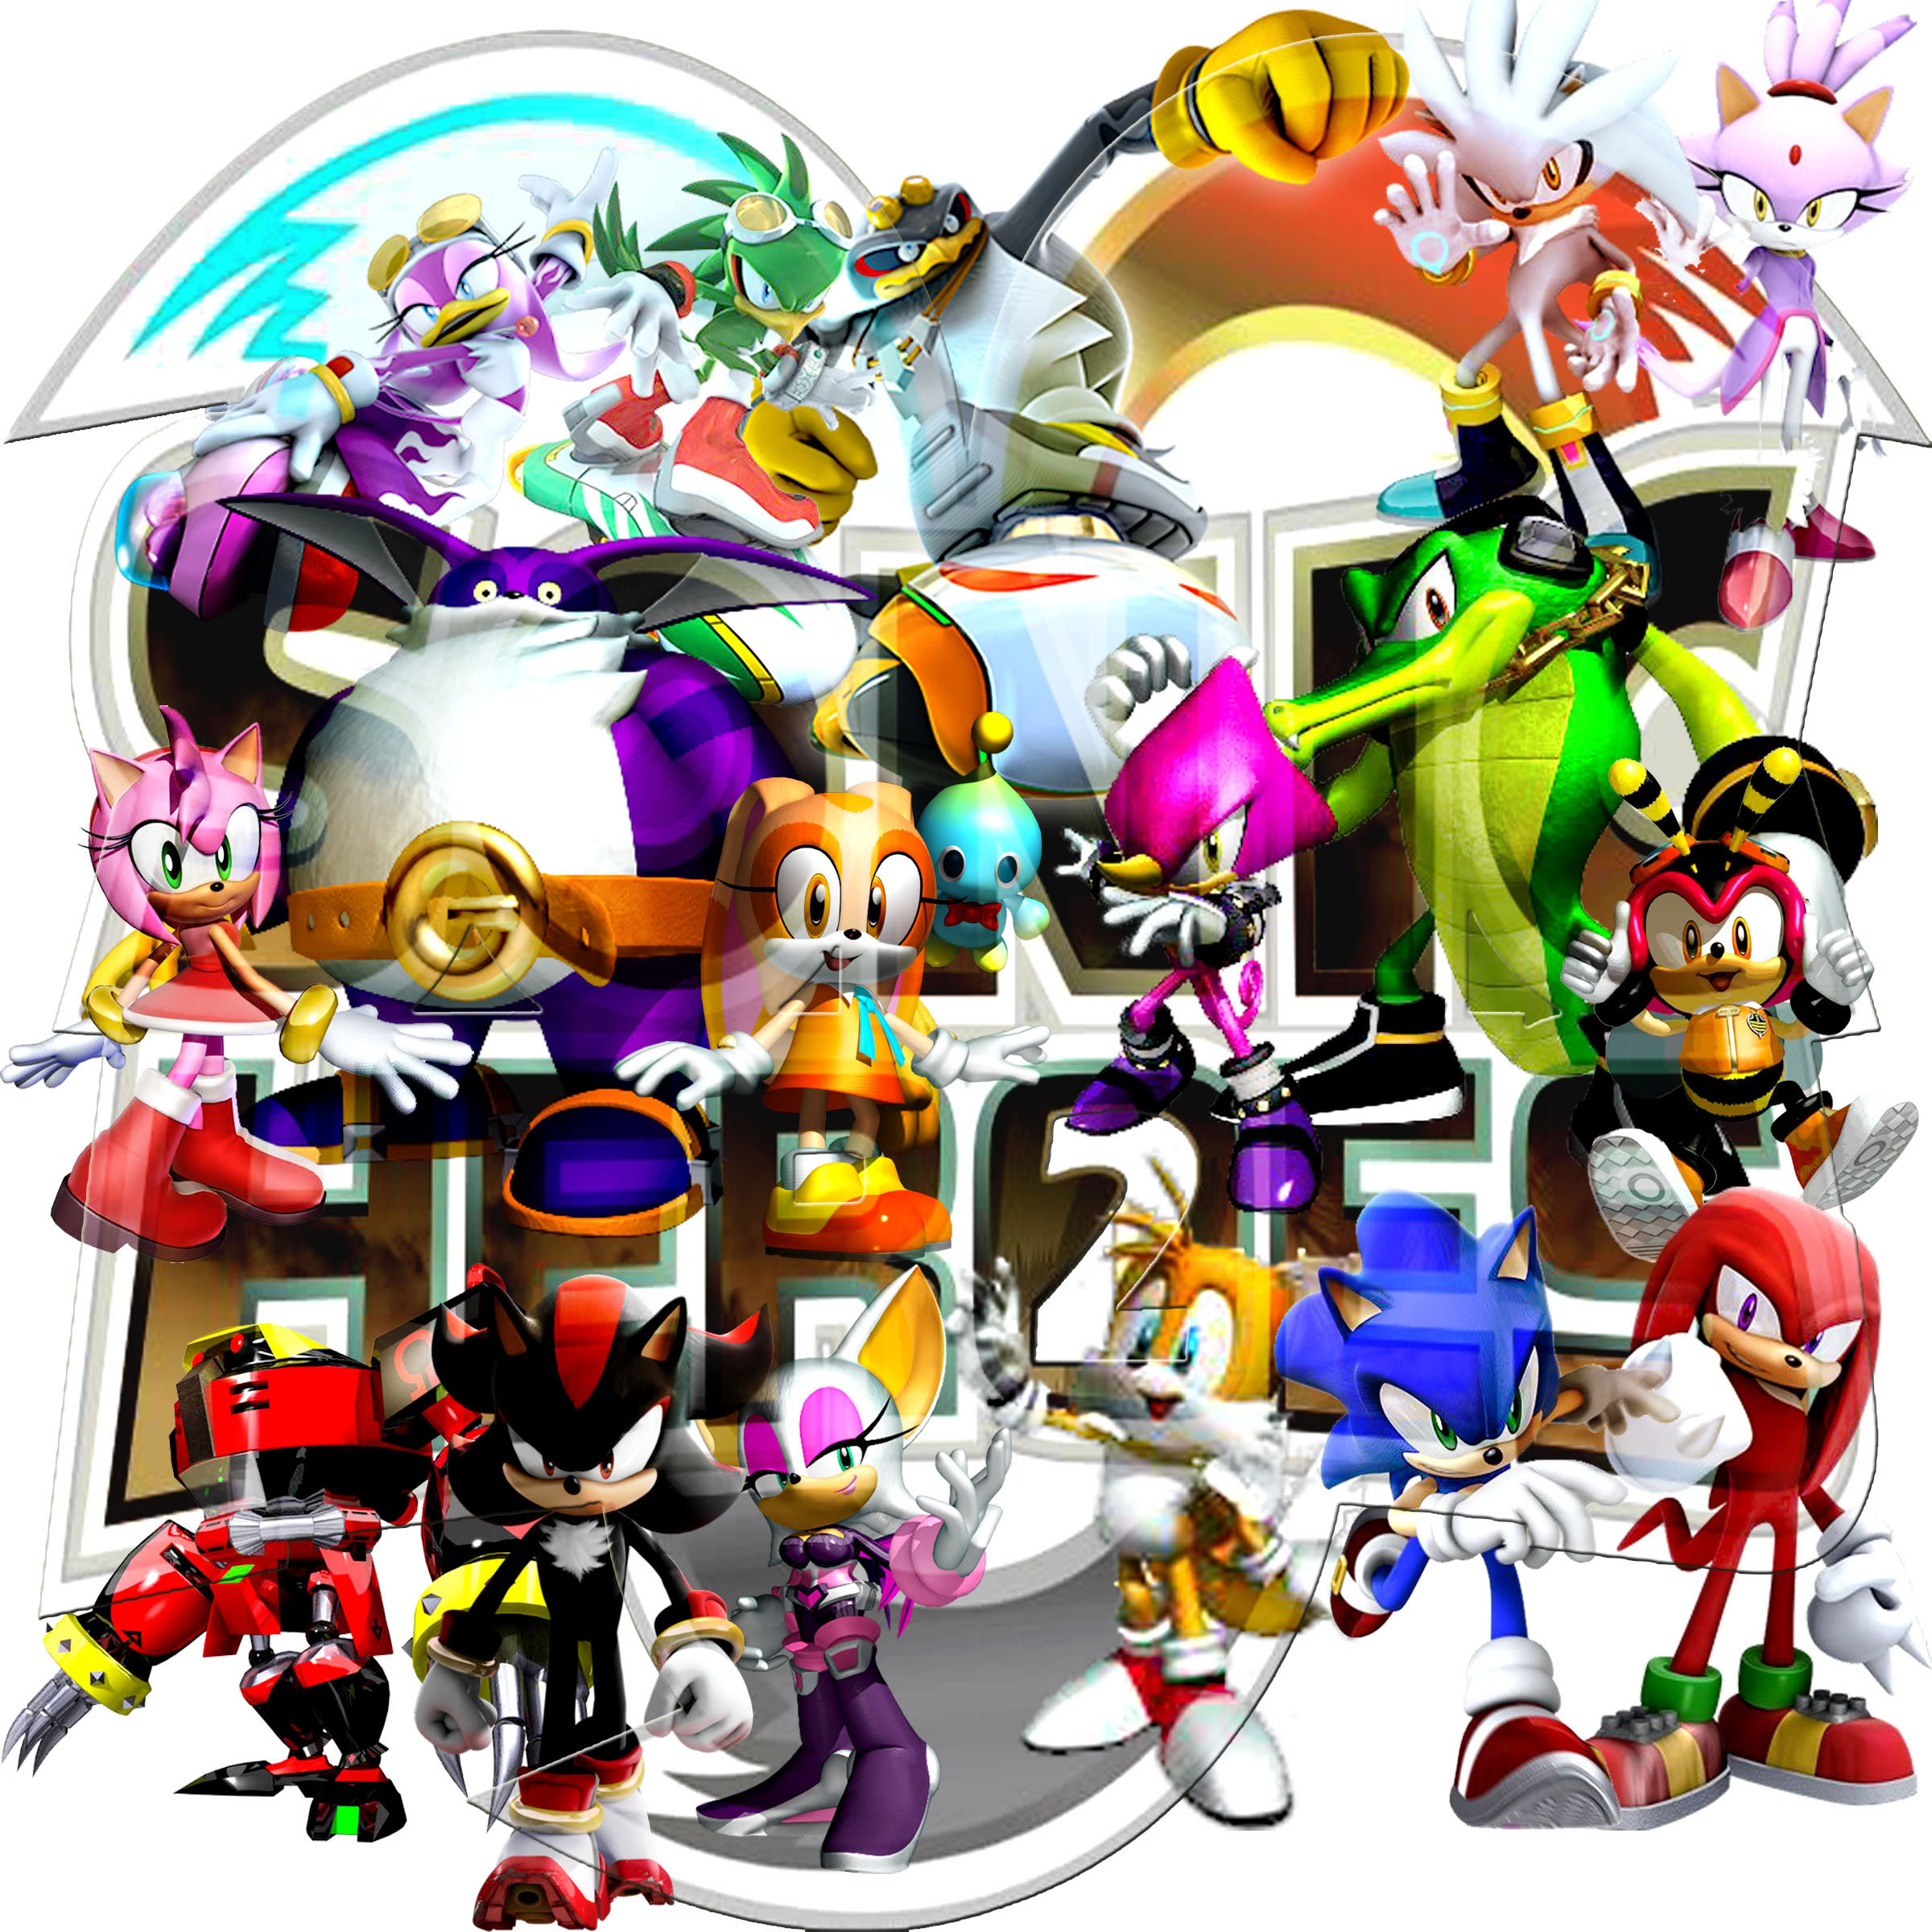 all sonic characters